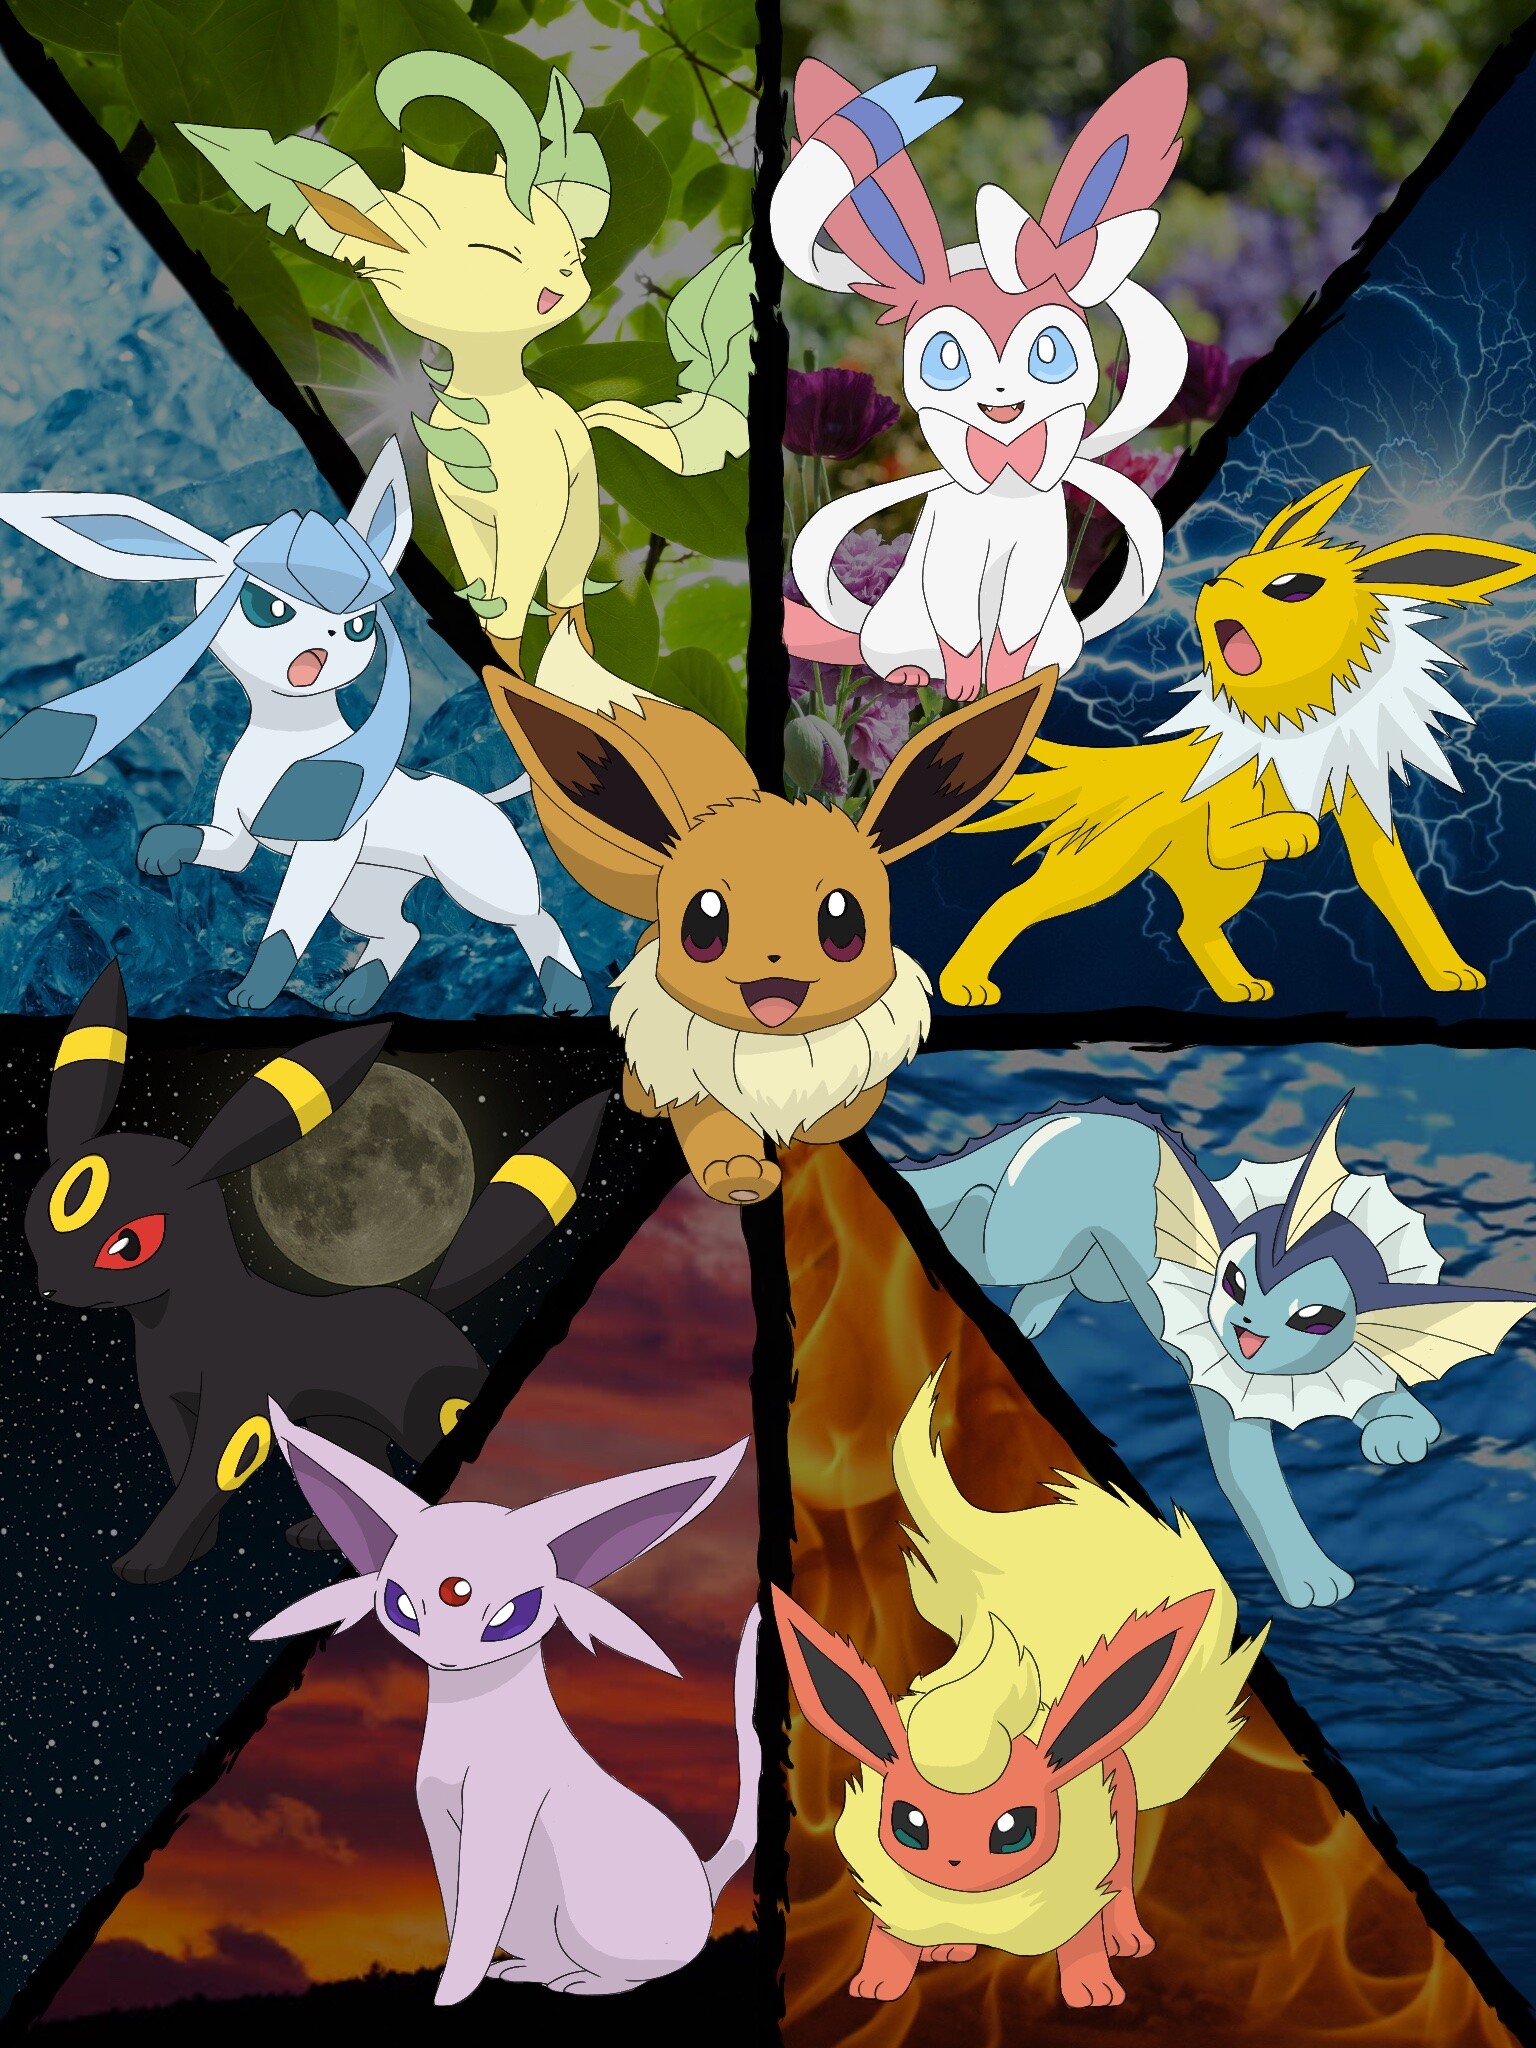 Eevee evolution for every type (some are concept art)  Eevee evolutions,  Pokemon eevee evolutions, Pokemon eevee